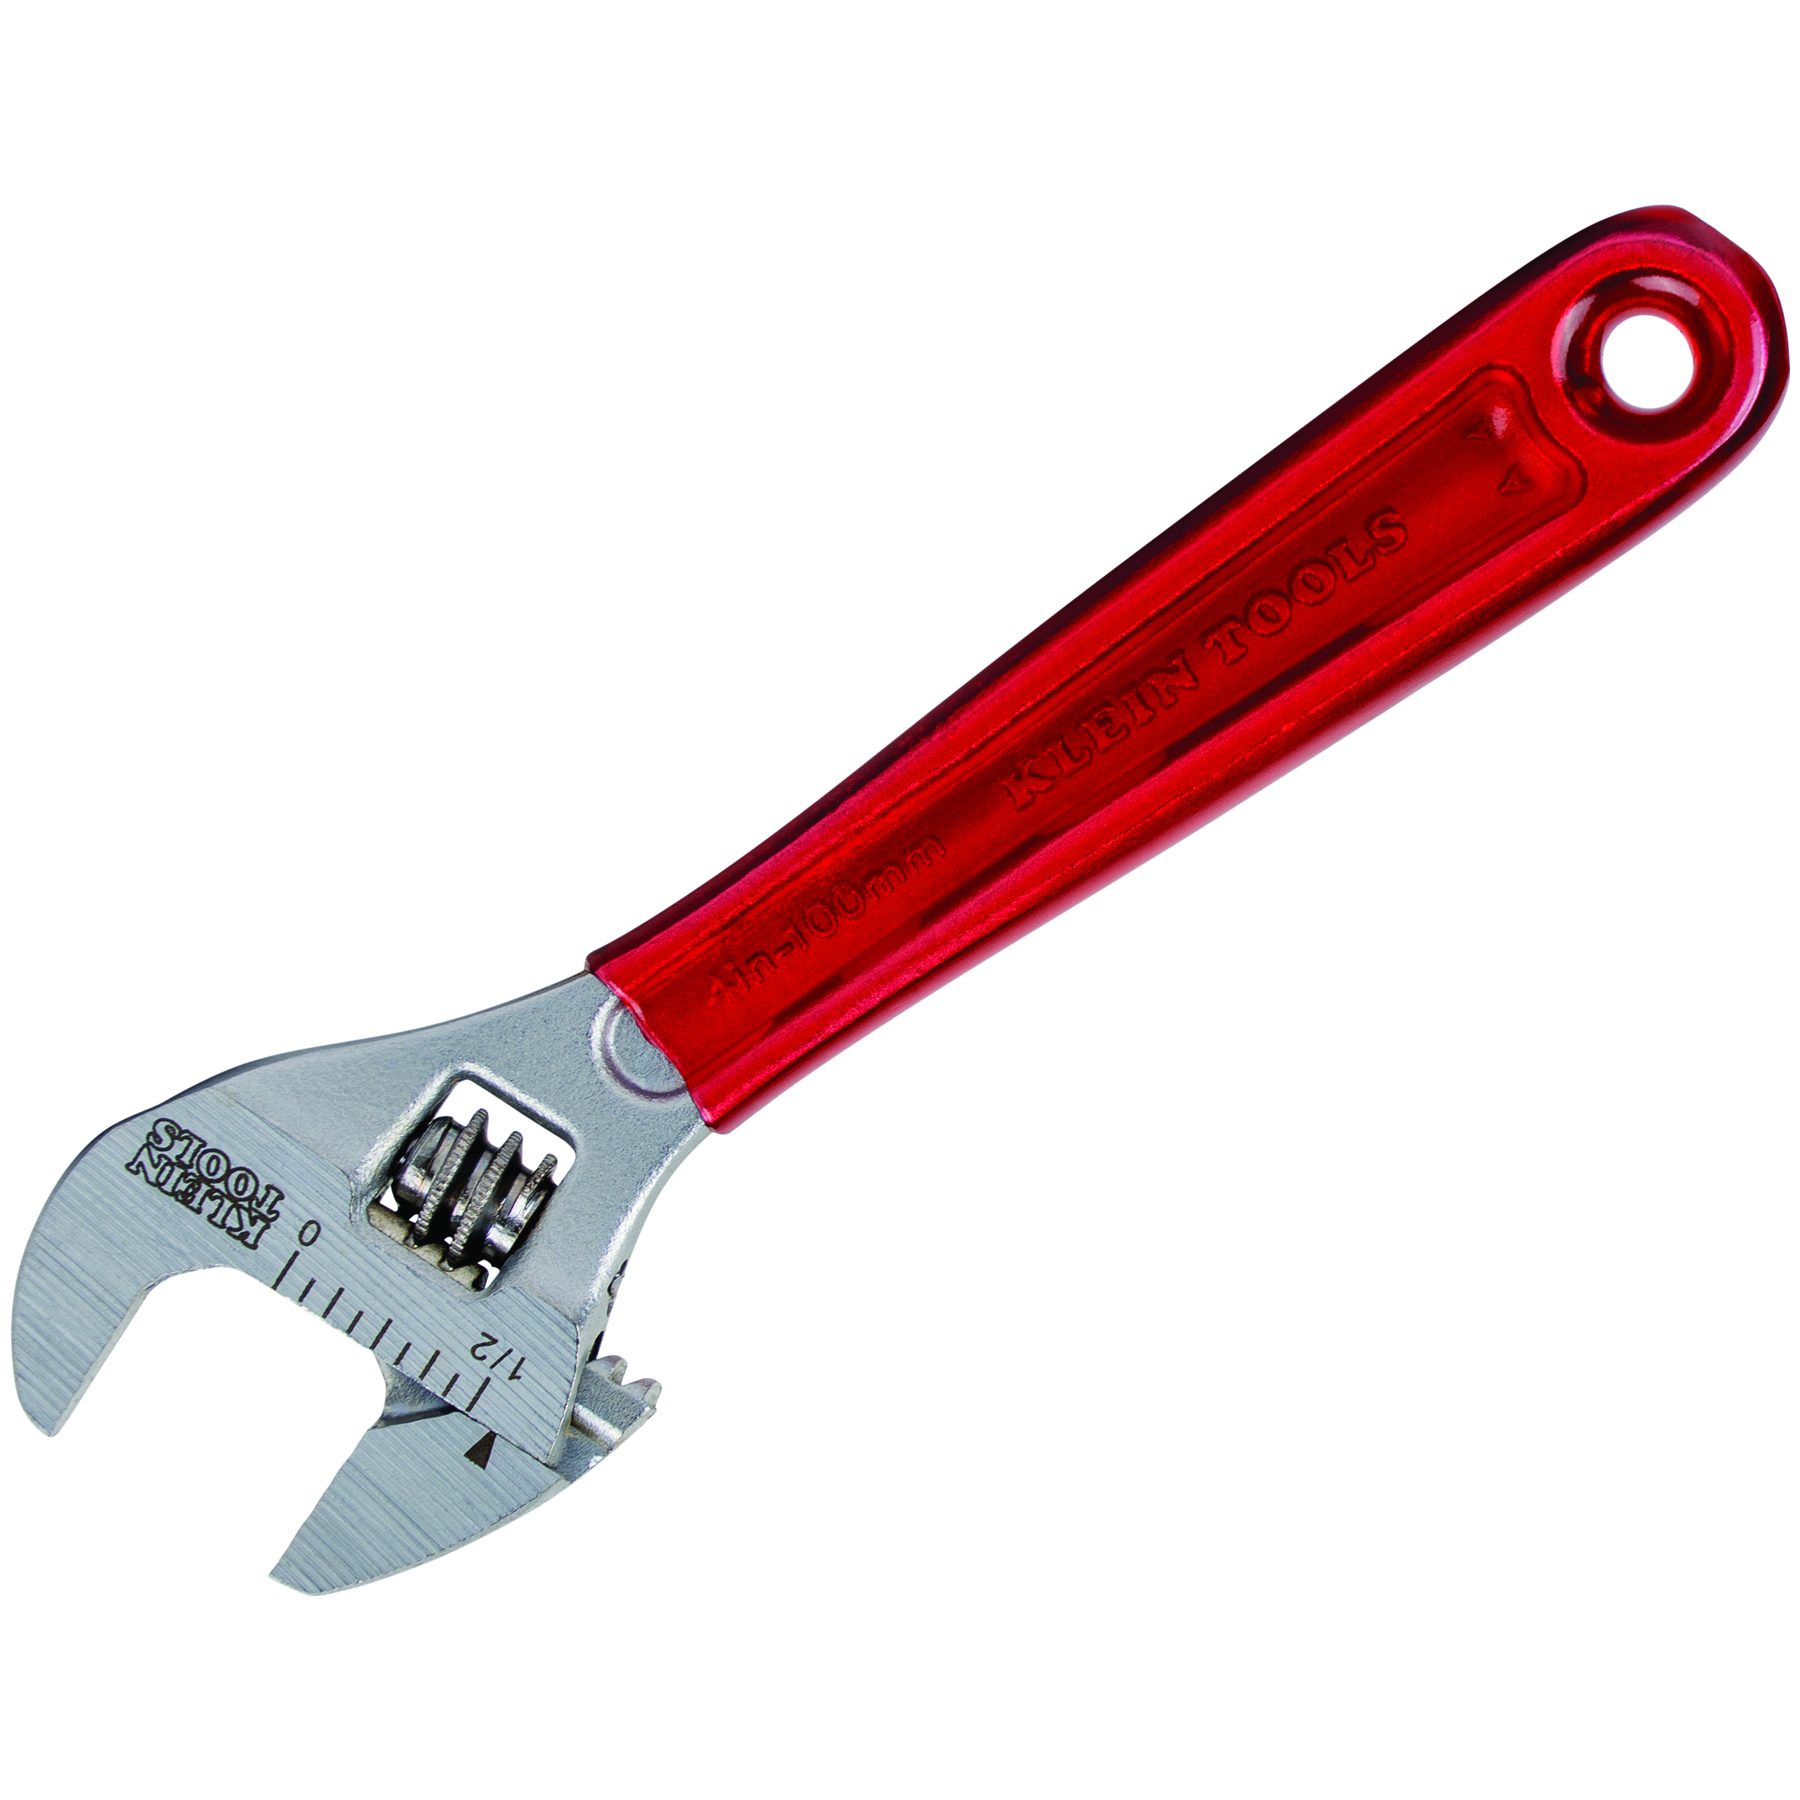 10' ADJUSTABLE WRENCH EXTRA CAPACITY